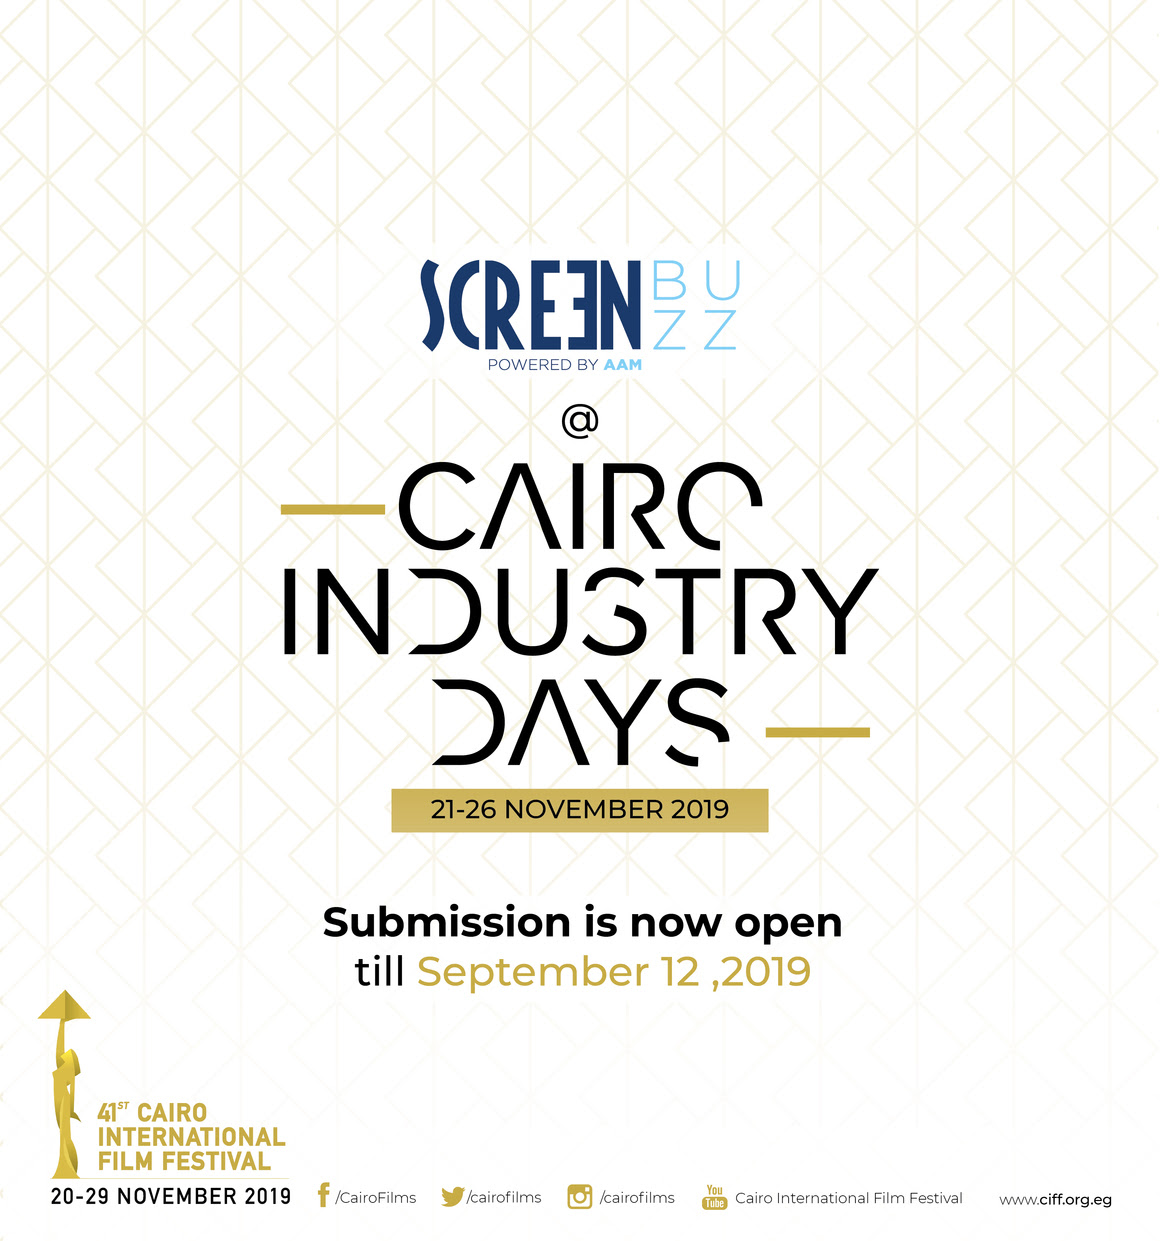 CIFF Opens Call for Submissions for Screen Buzz TV Script Development Workshop